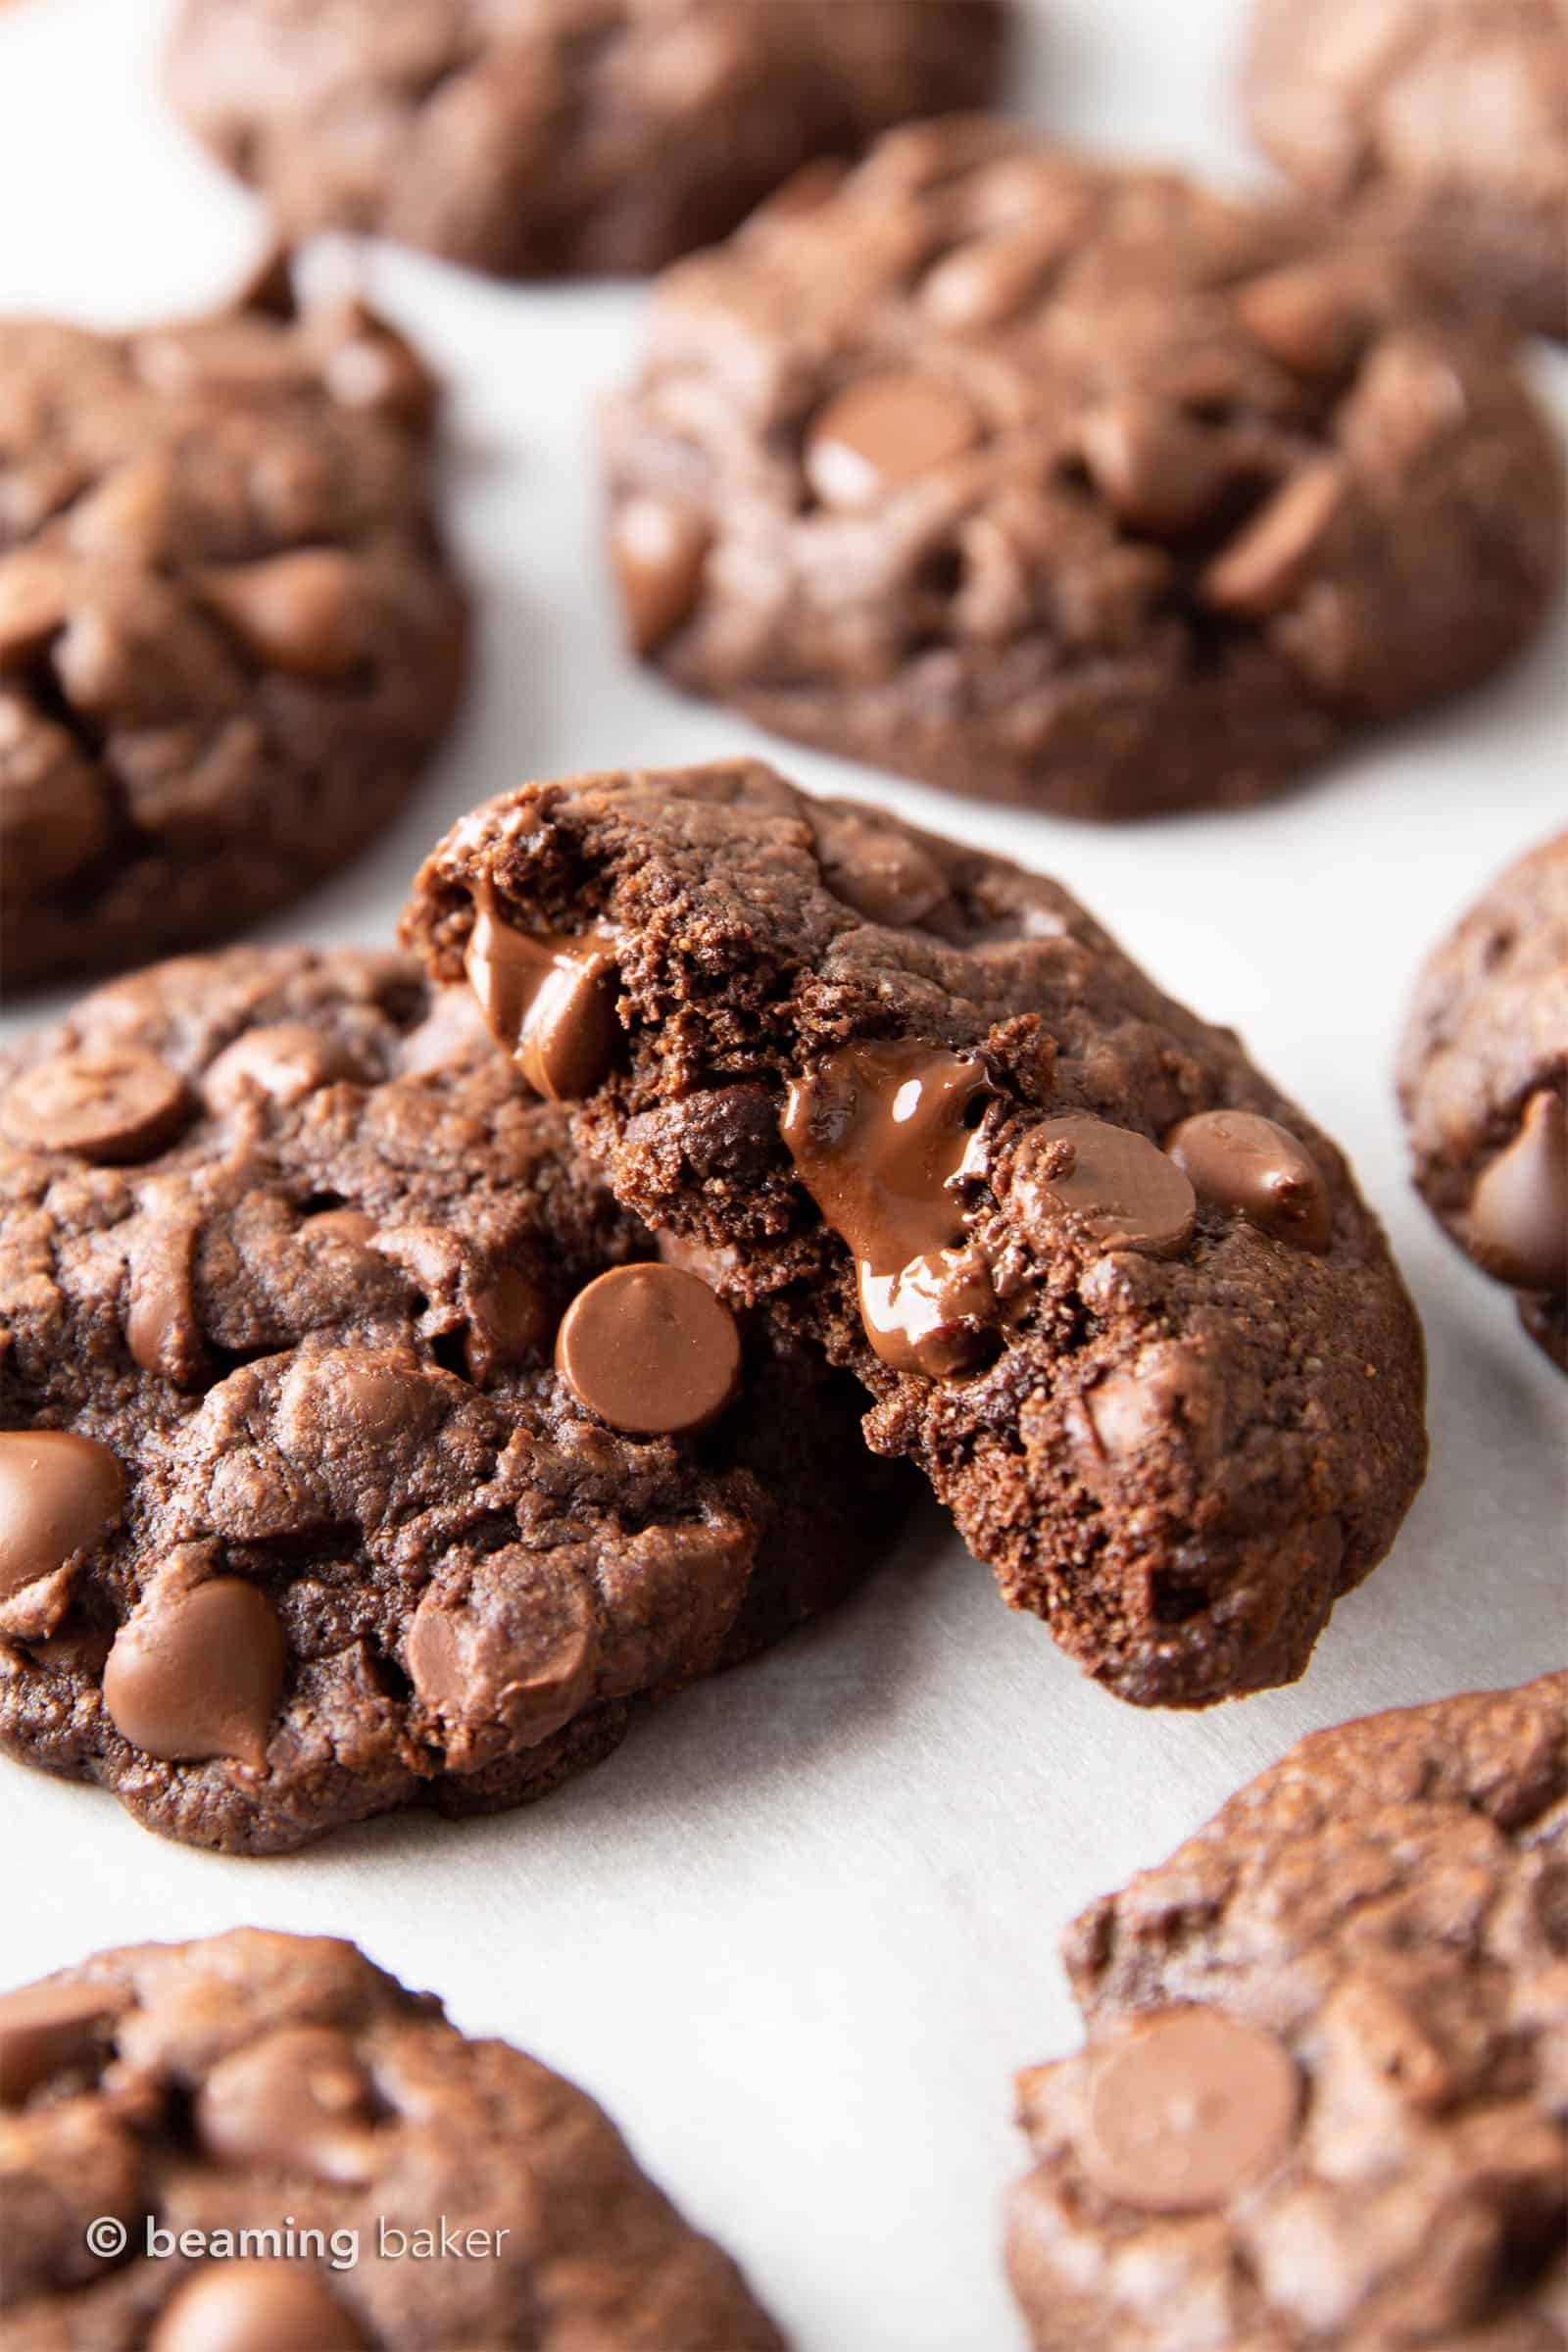 Gluten Free Chocolate Cookies: chewy & moist gluten free brownie cookies with a crispy exterior and LOTS of chocolate packed in! The BEST gluten free chocolate brownie cookie recipe EVER. #Brownies #GlutenFree #Cookies #Vegan | Recipe at BeamingBaker.com